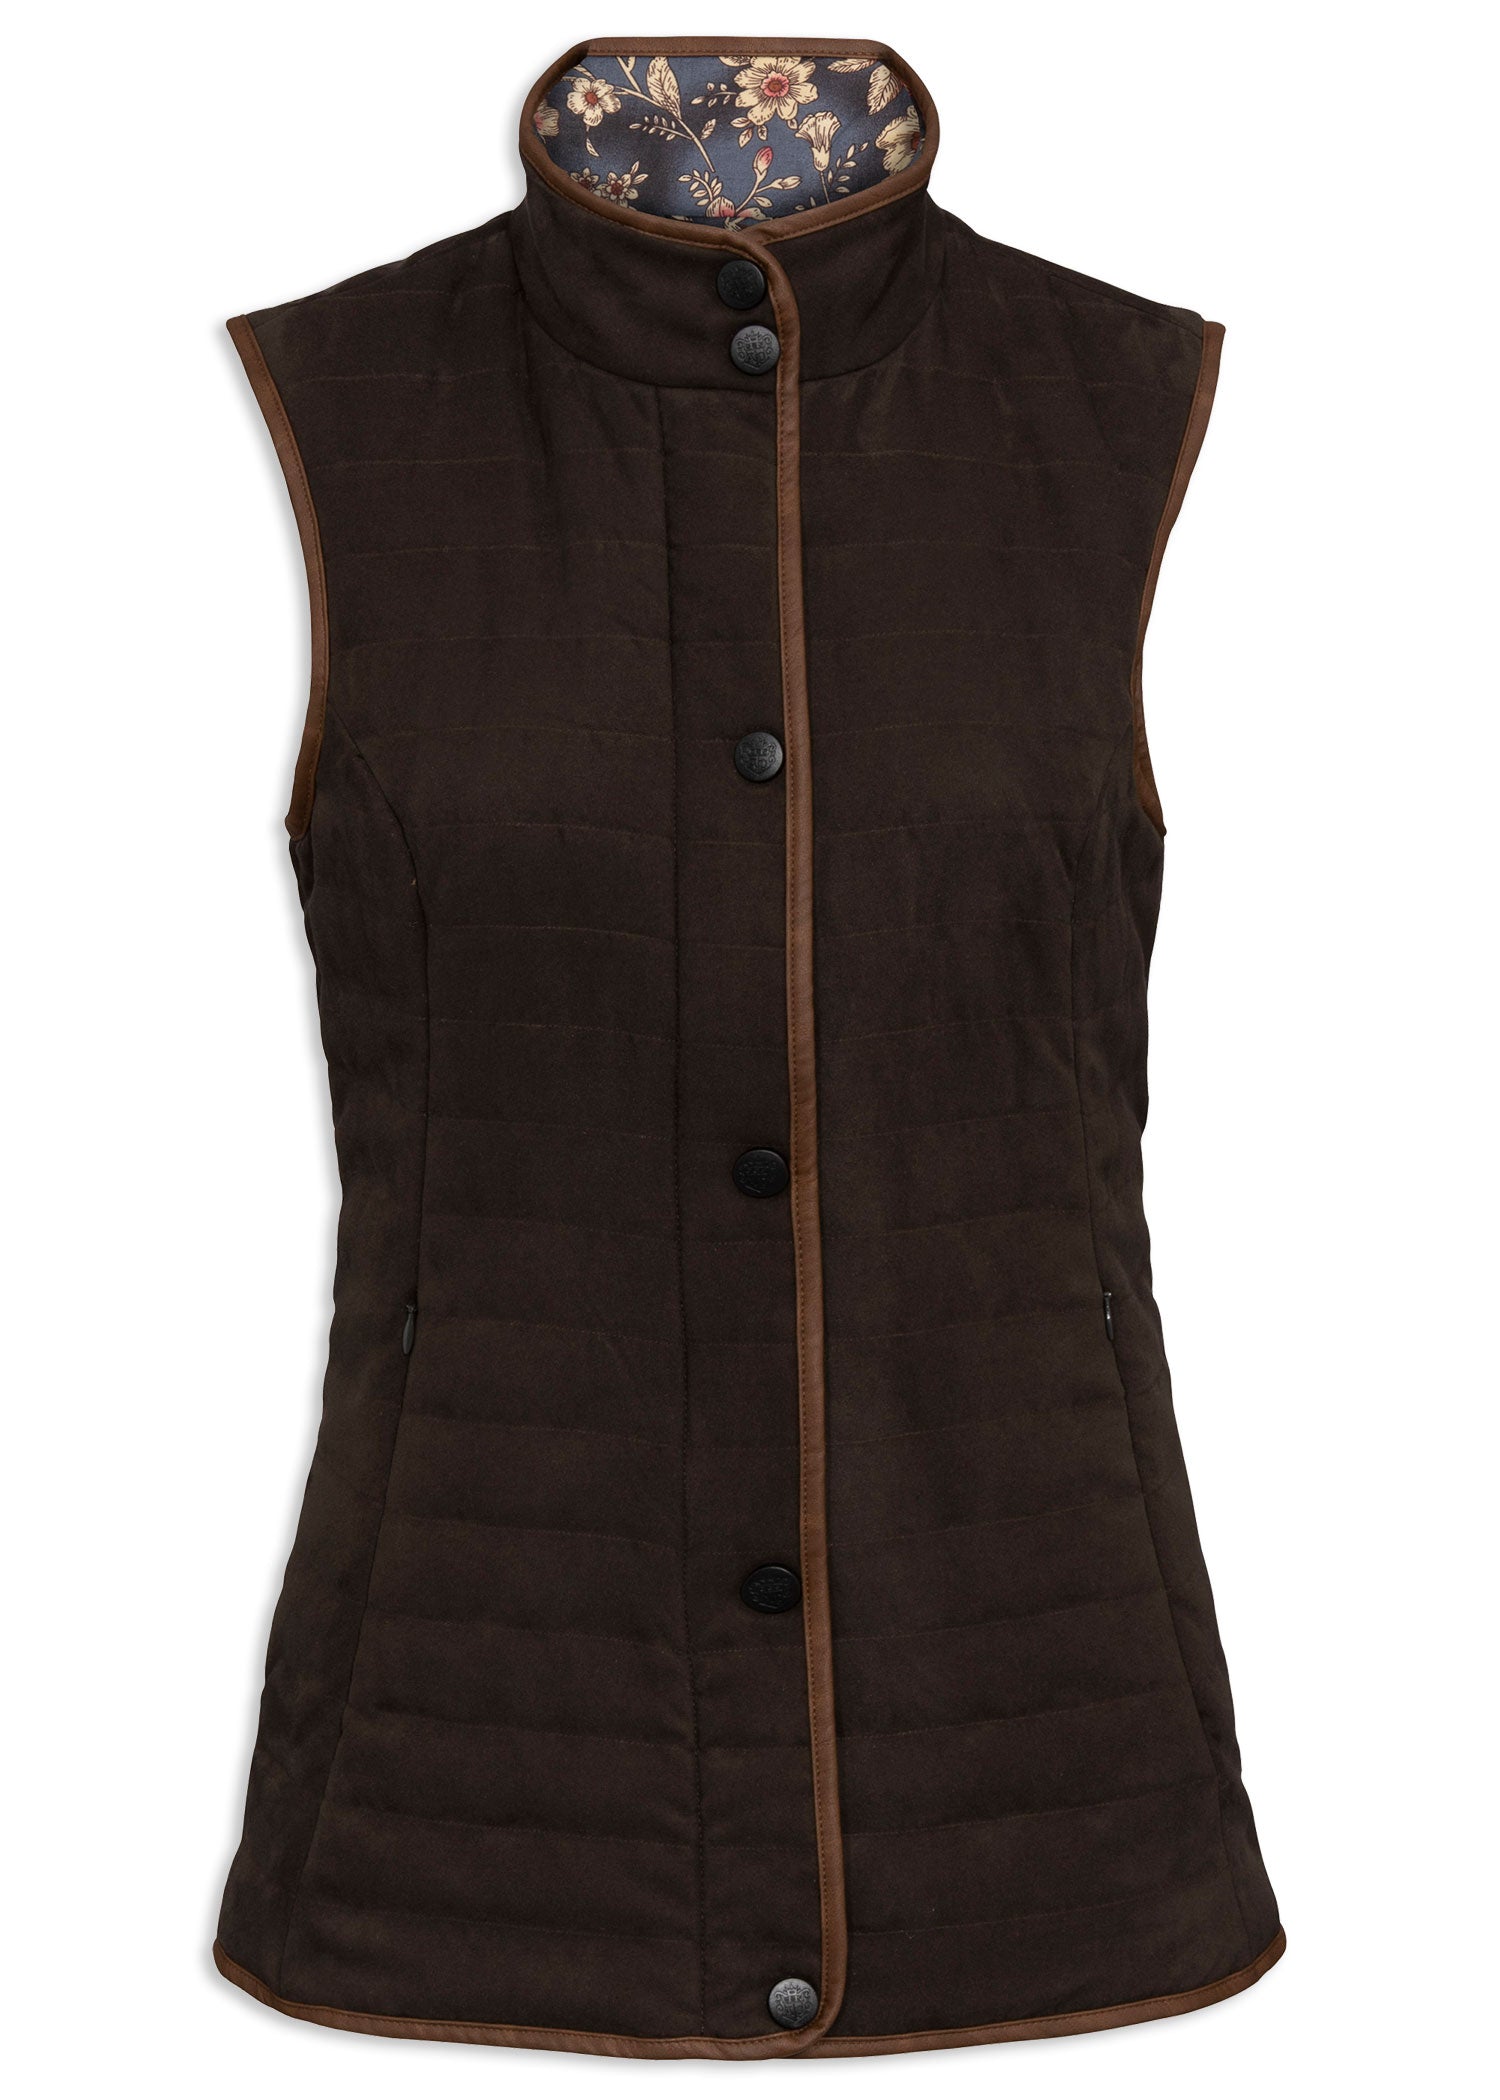 Olive Alan Paine Ladies Felwell Quilted Gilet